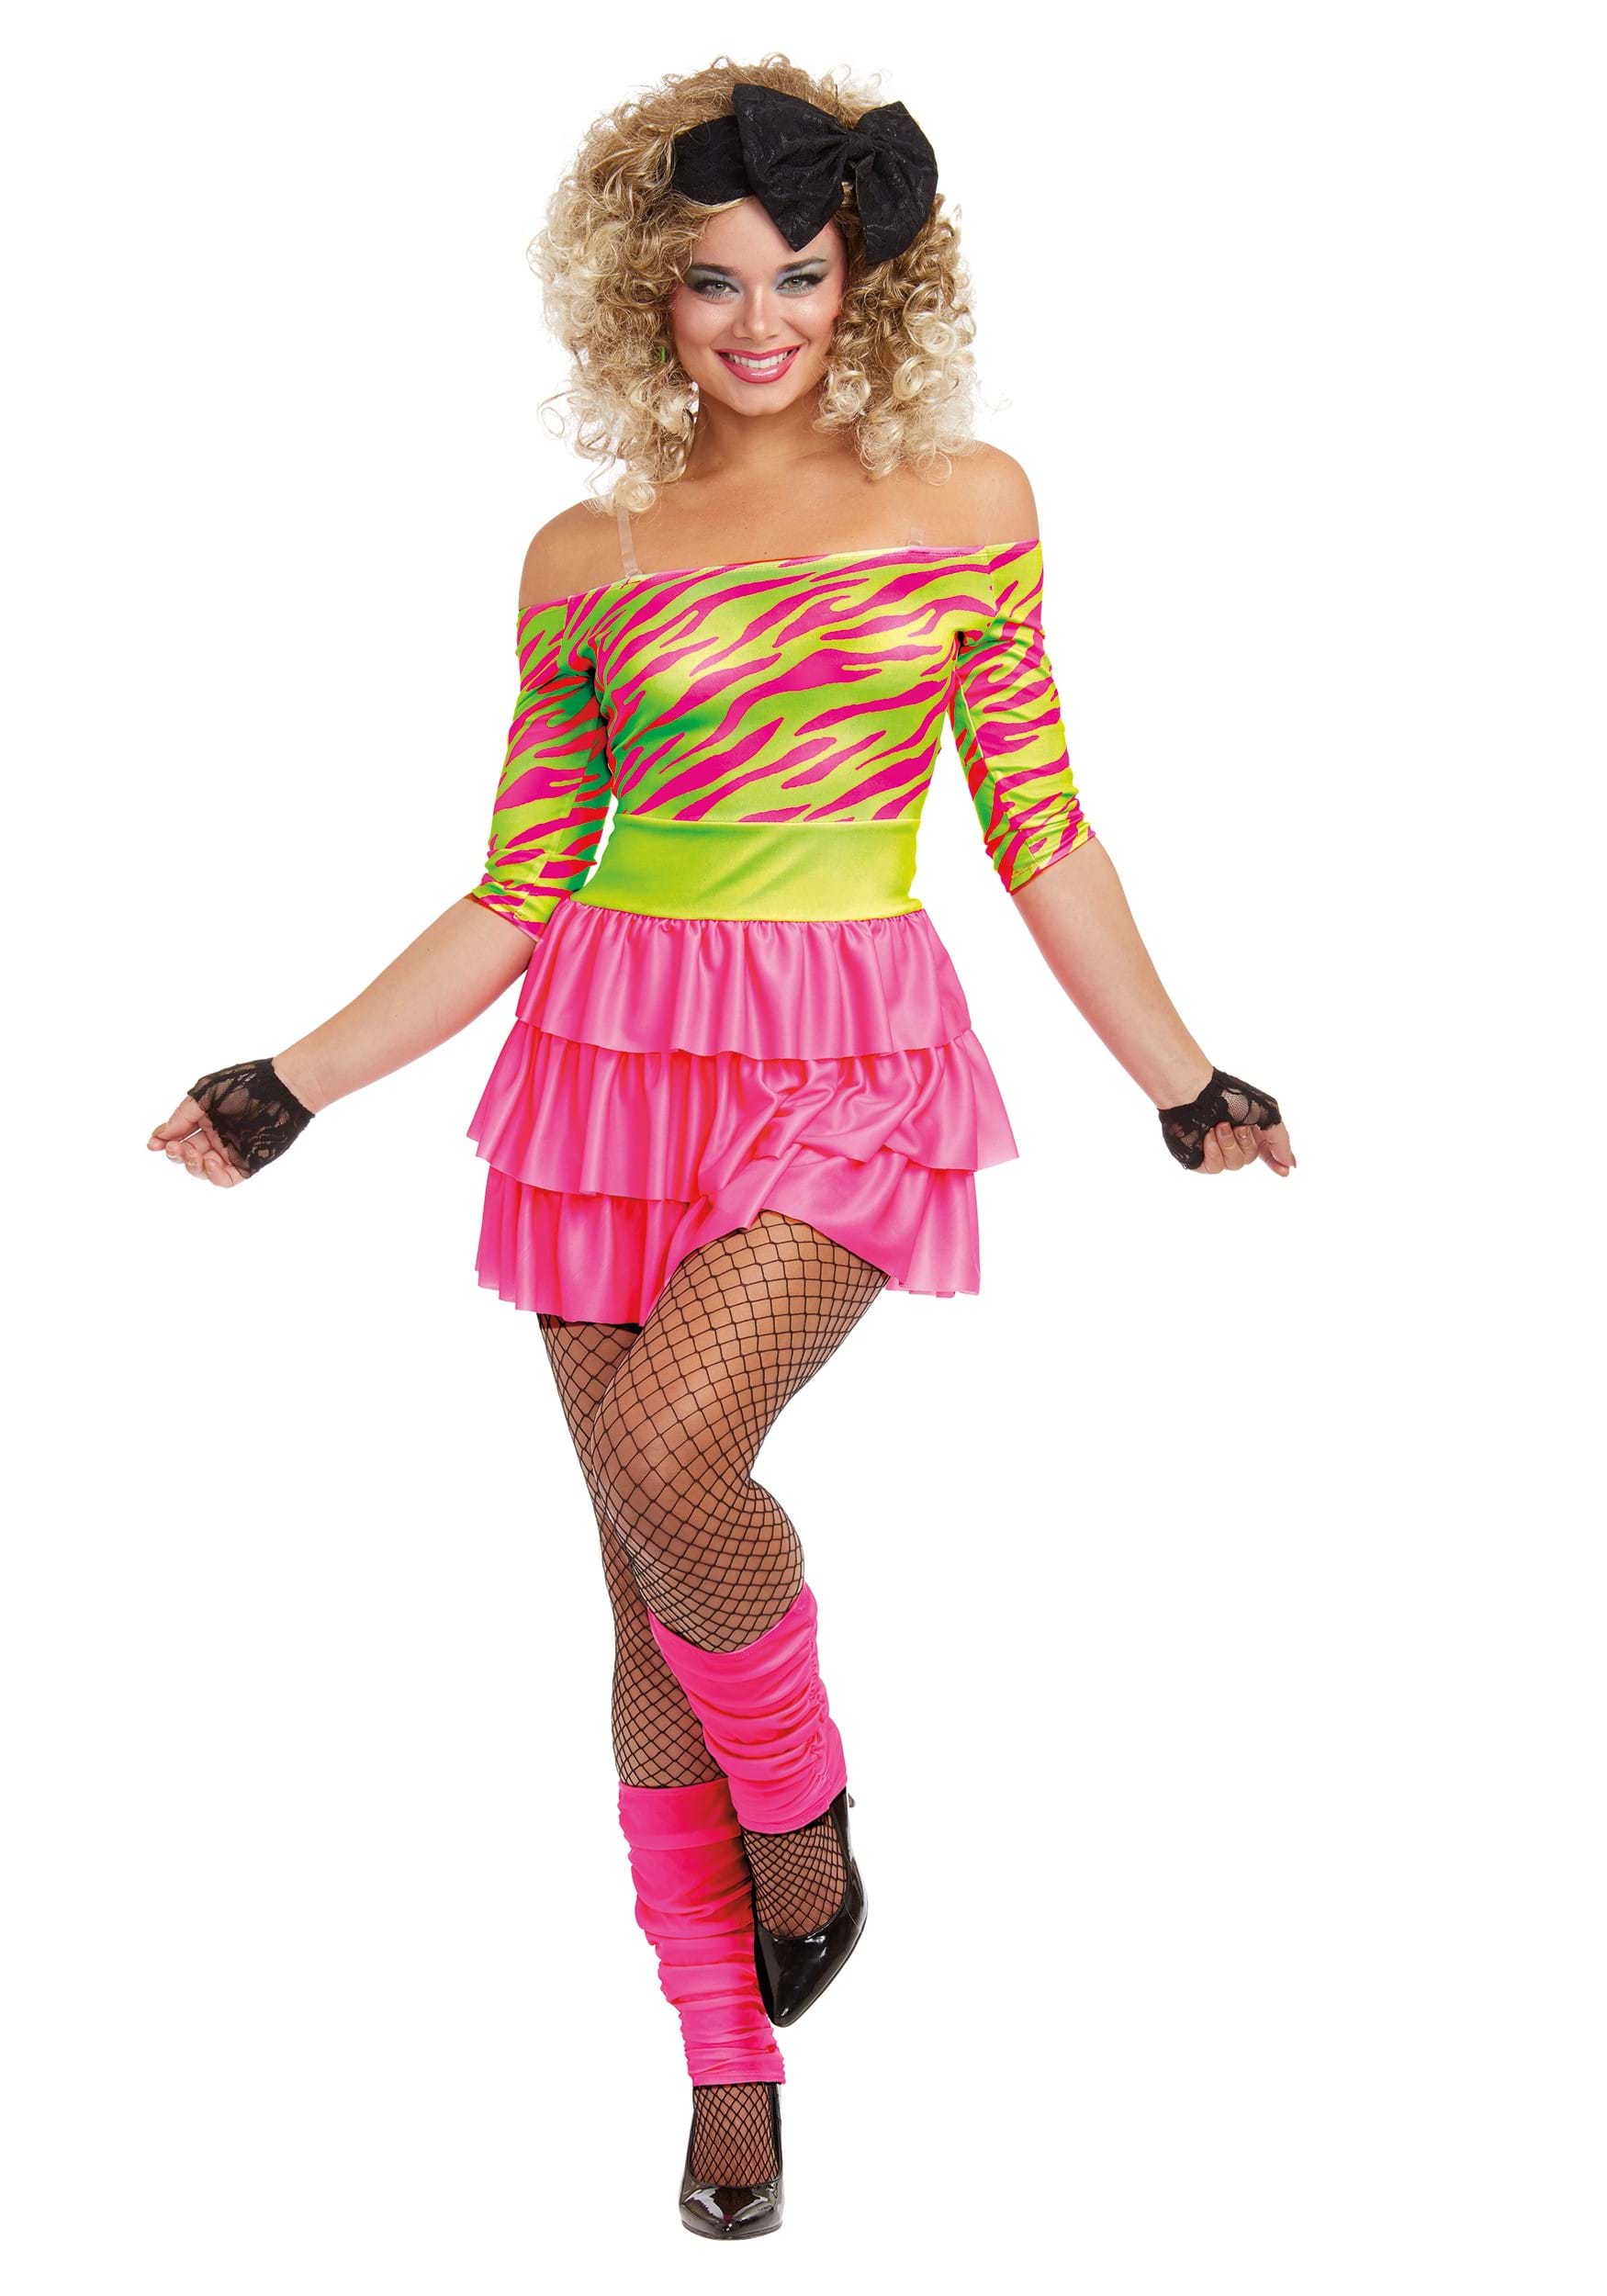 Ladies Opaque Neon 80's Tights Fancy Dress Costume Accessory Full